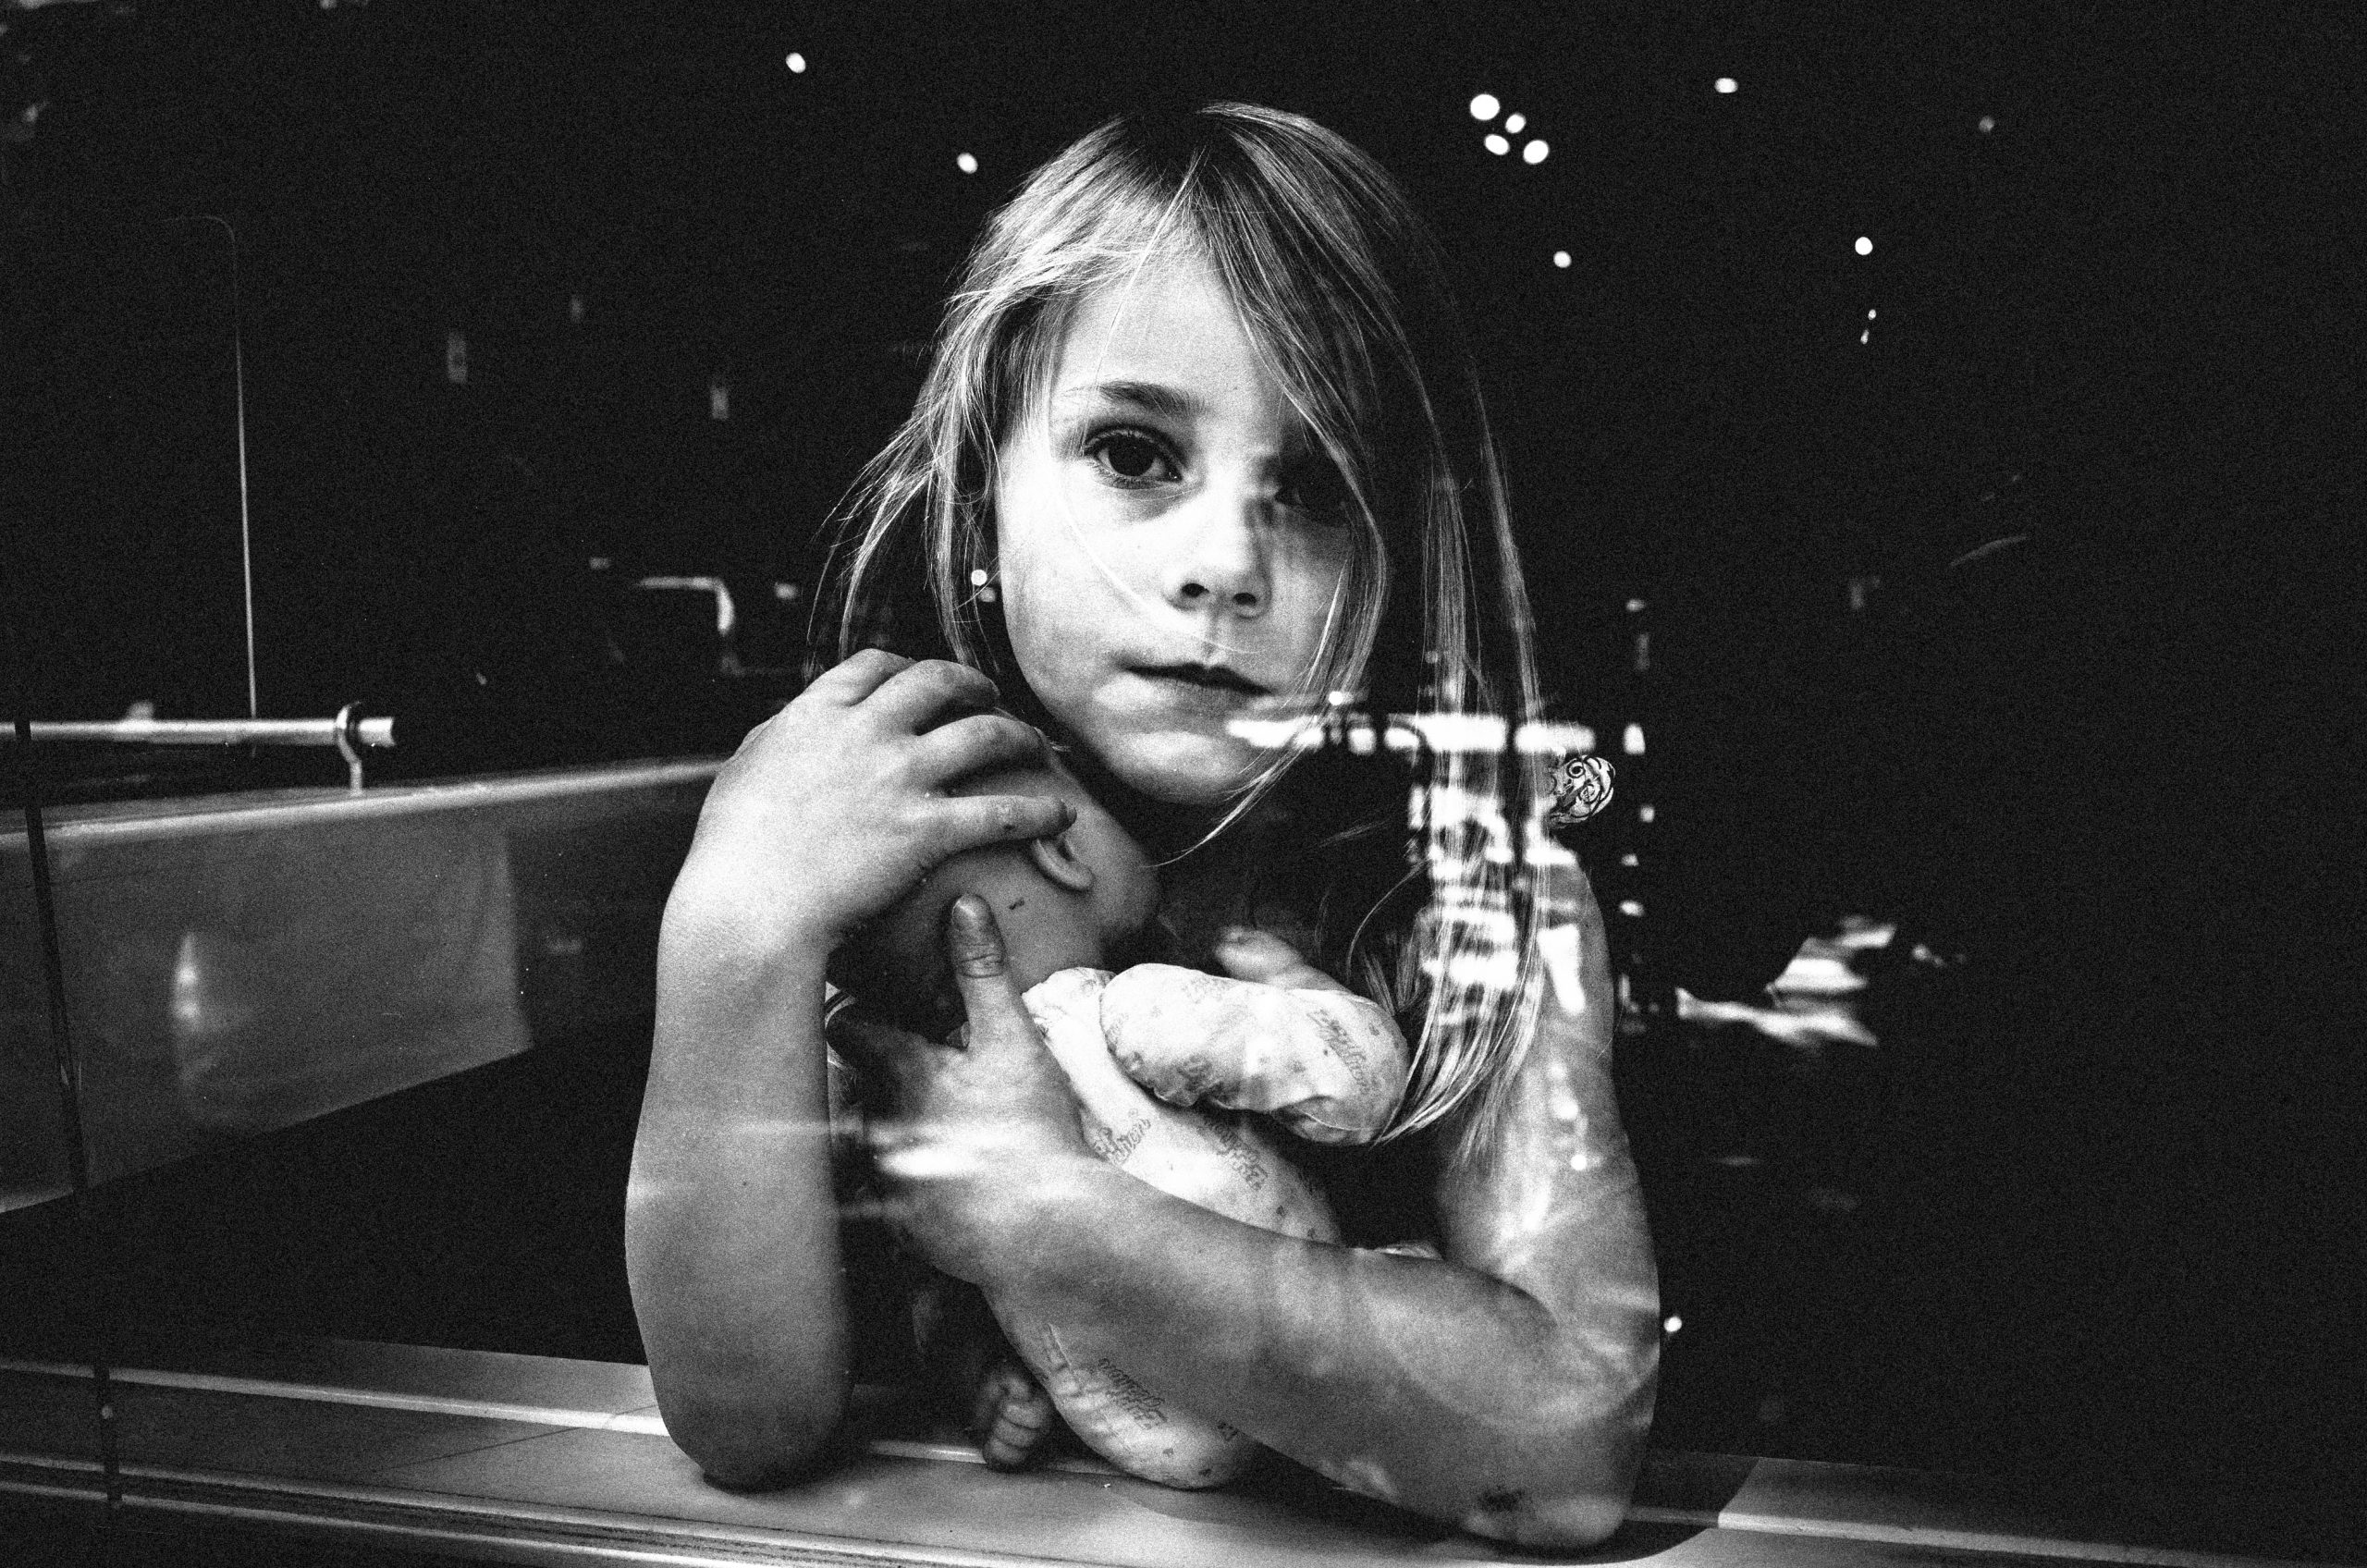 Amsterdam girl with doll— reminds me of pieta. Amsterdam, 2015 #ricohgrii